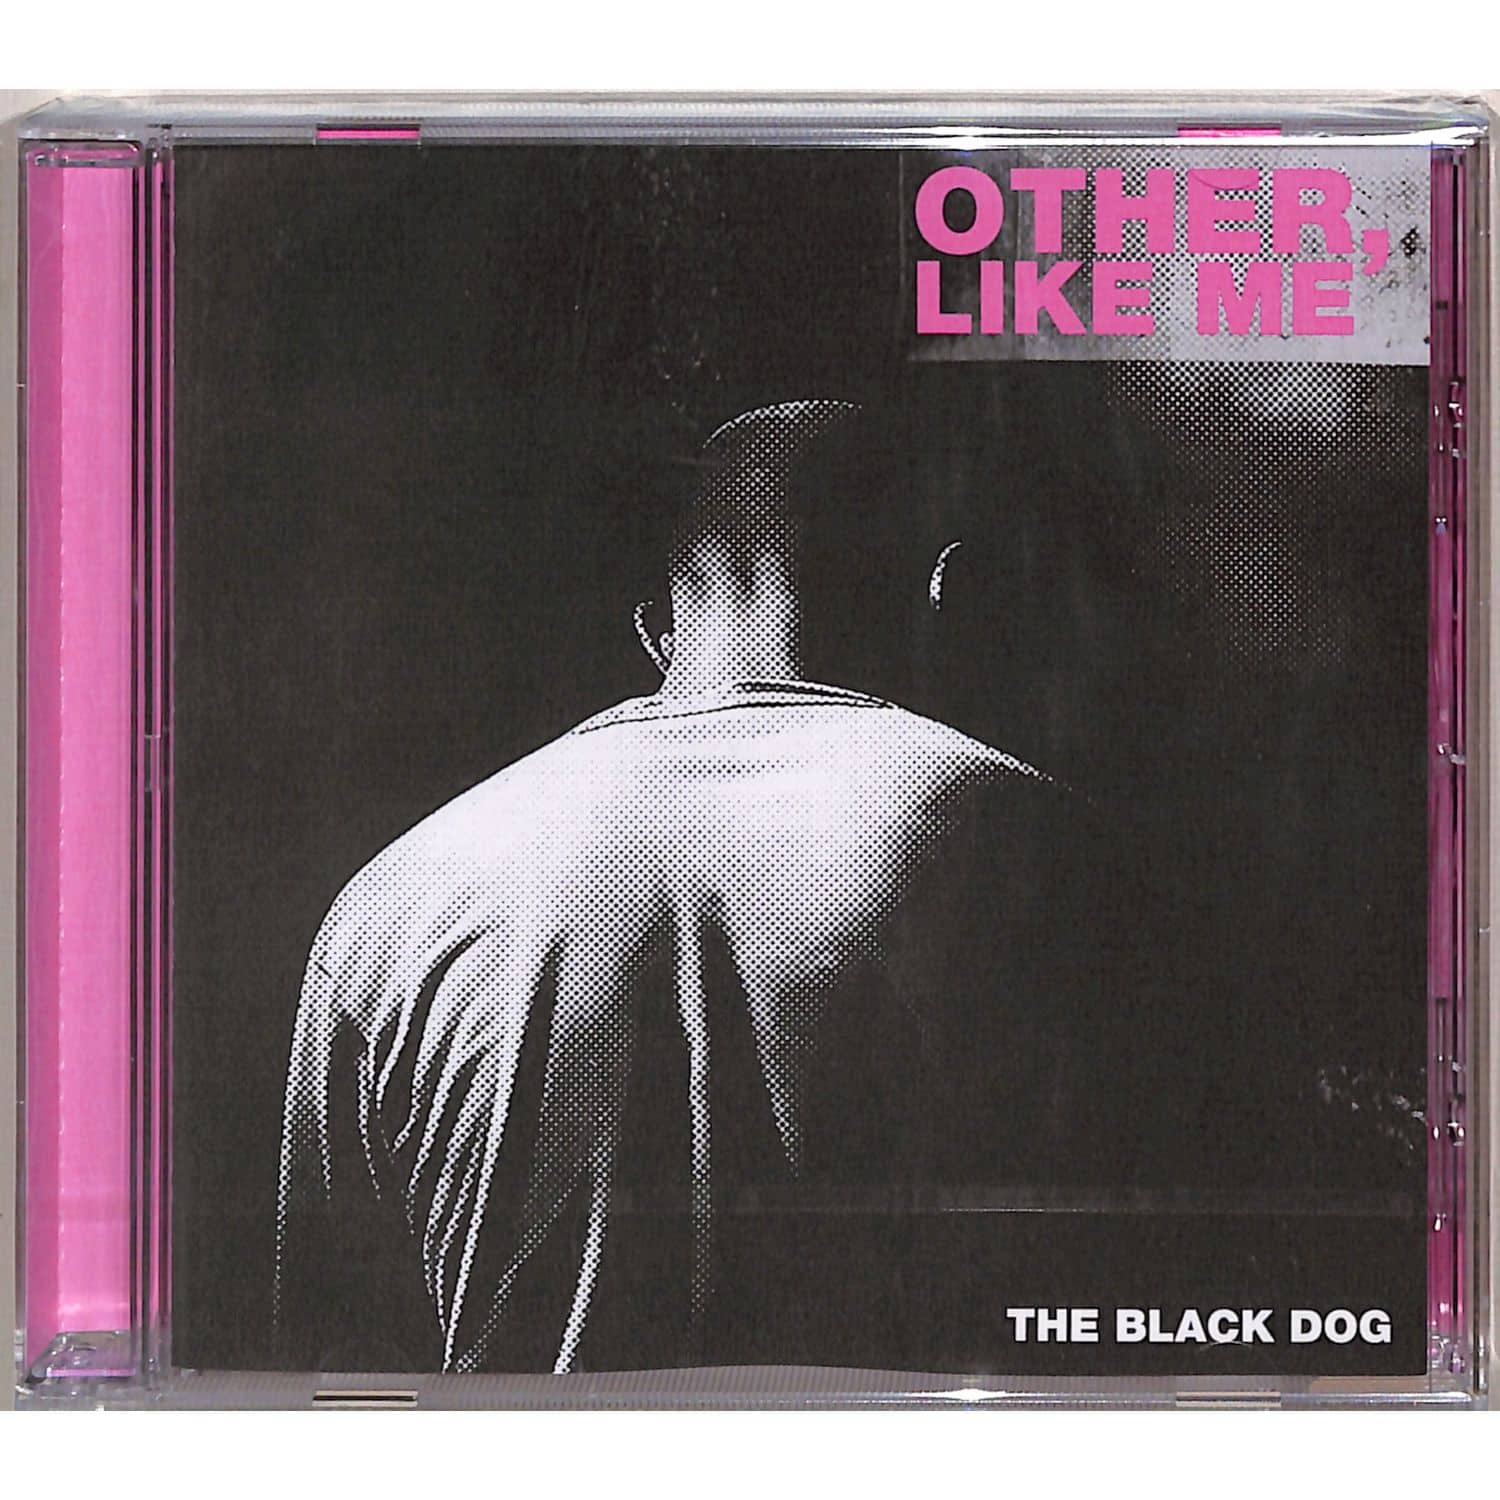 The Black Dog - OTHER, LIKE ME 